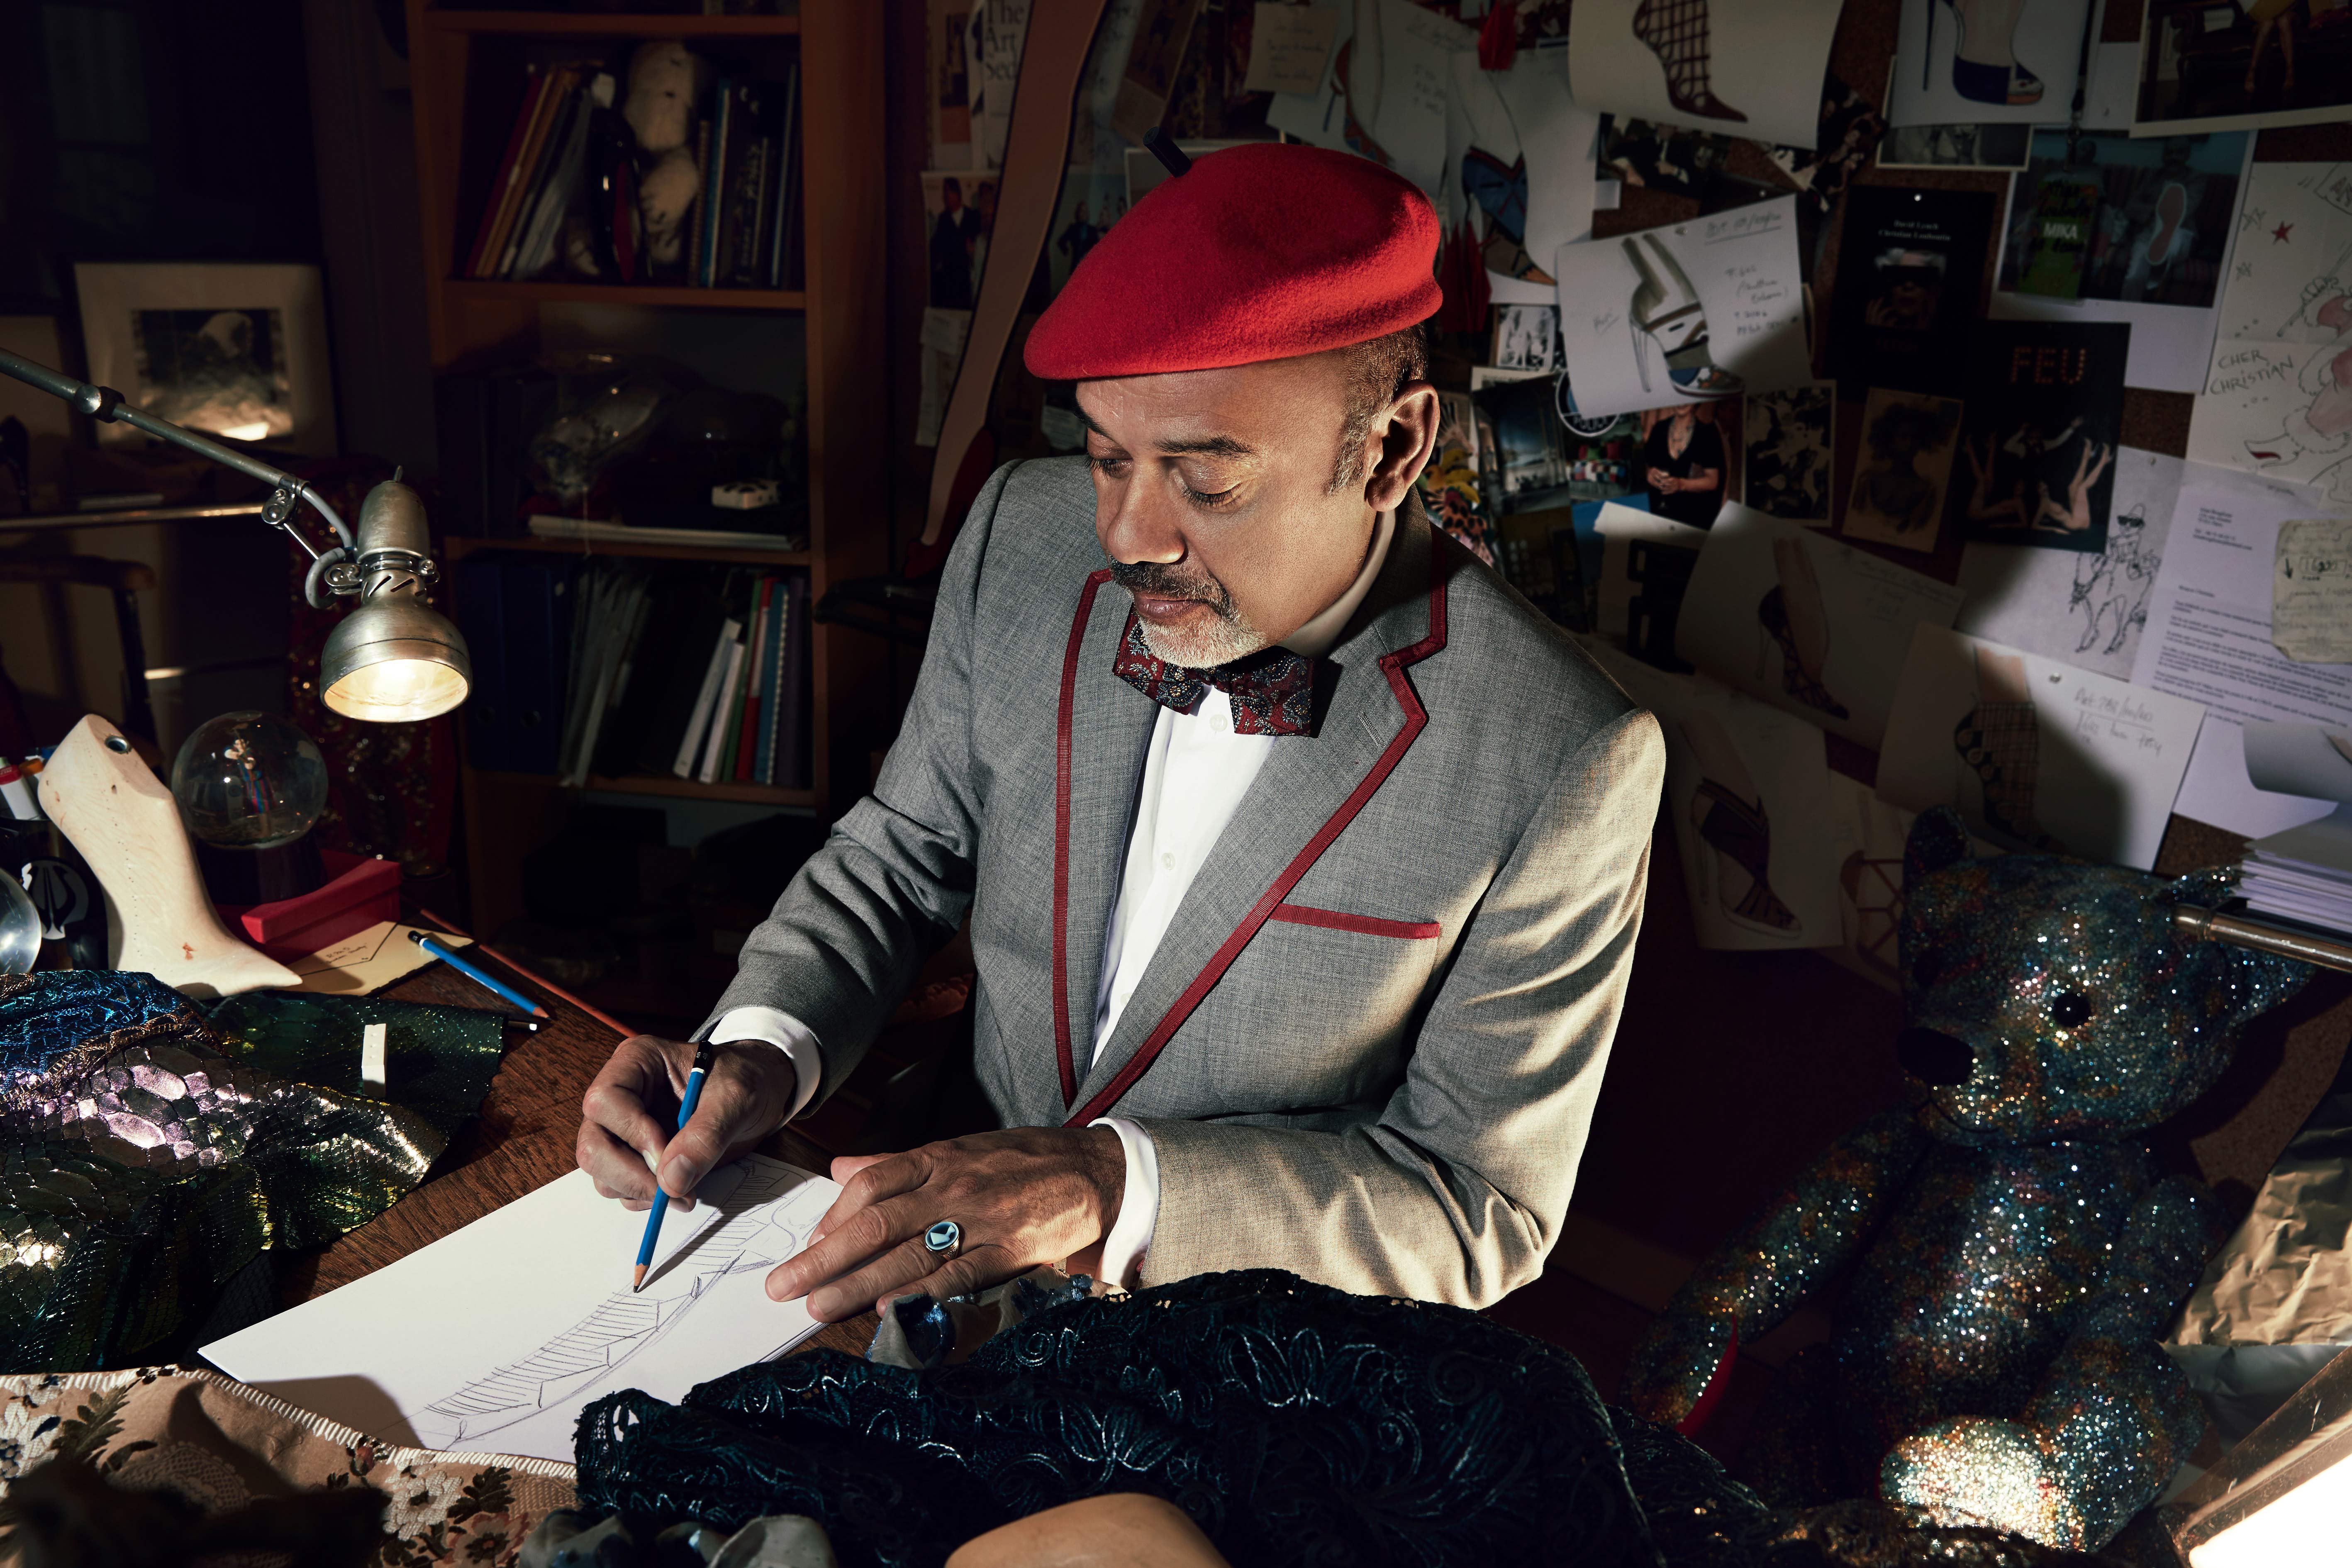 Christian Louboutin exhibition opening in Paris in 2020